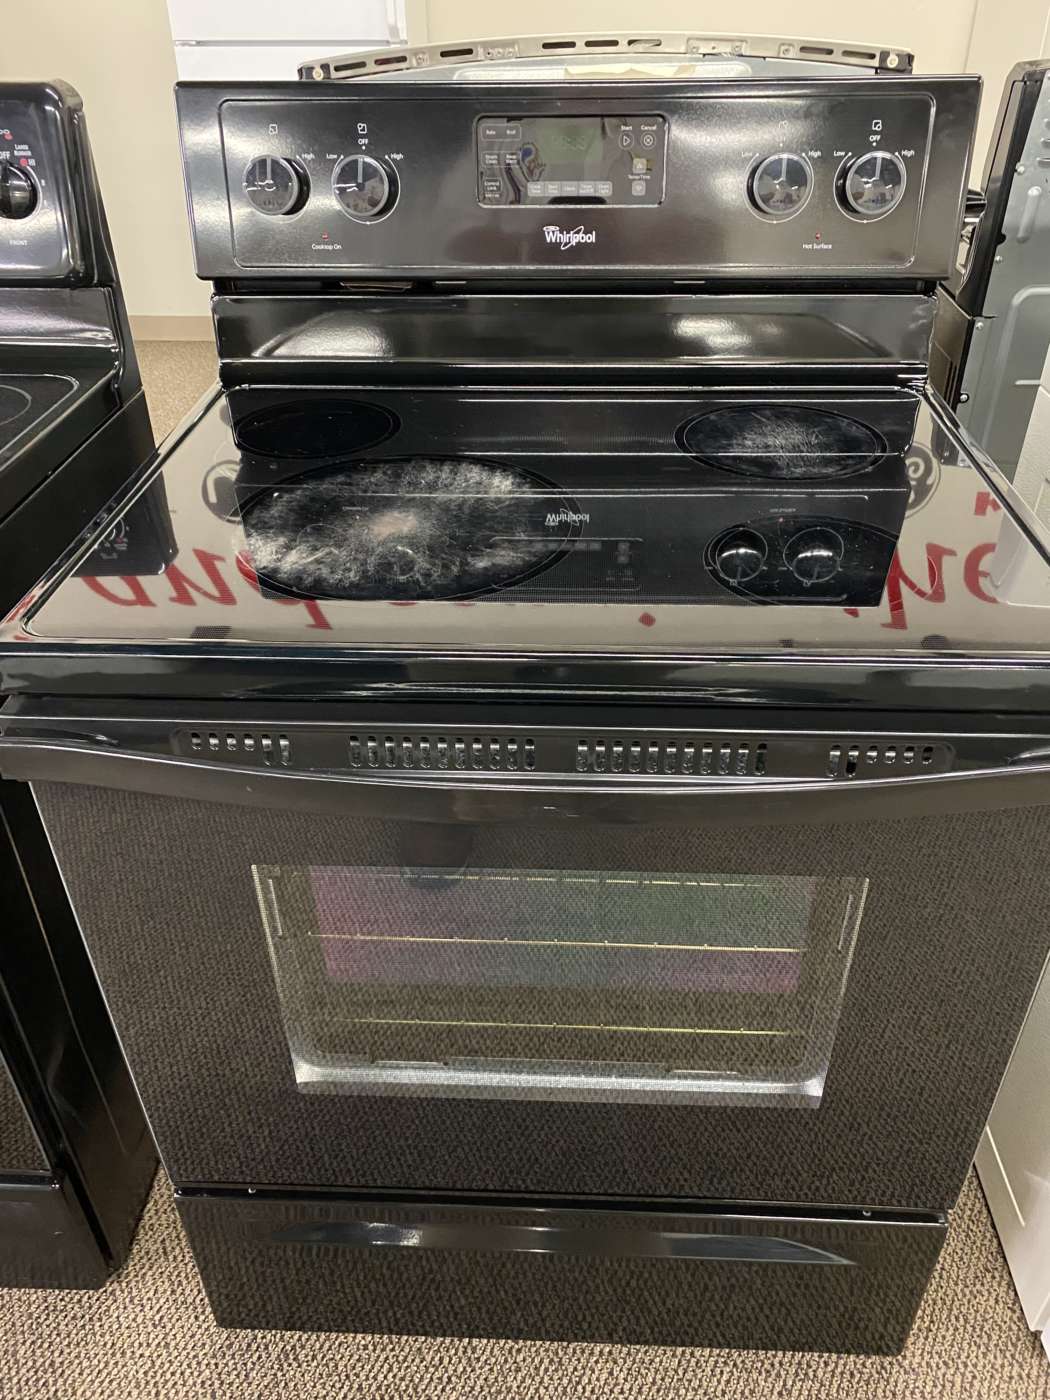 Reconditioned WHIRLPOOL Standard-Oven Electric Range – Black